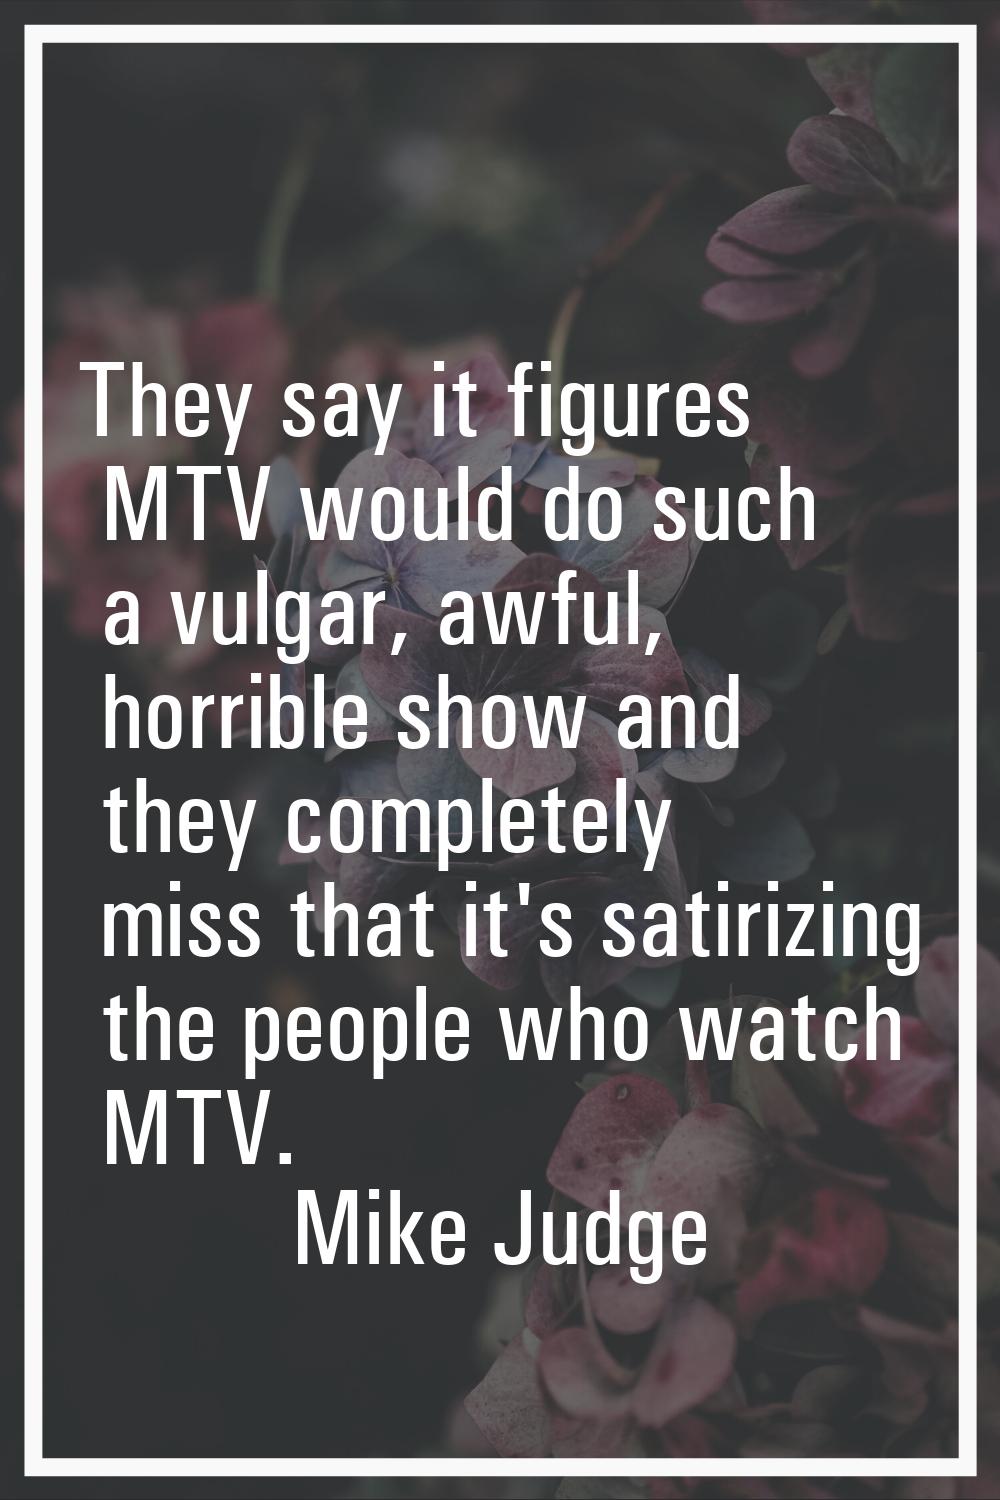 They say it figures MTV would do such a vulgar, awful, horrible show and they completely miss that 